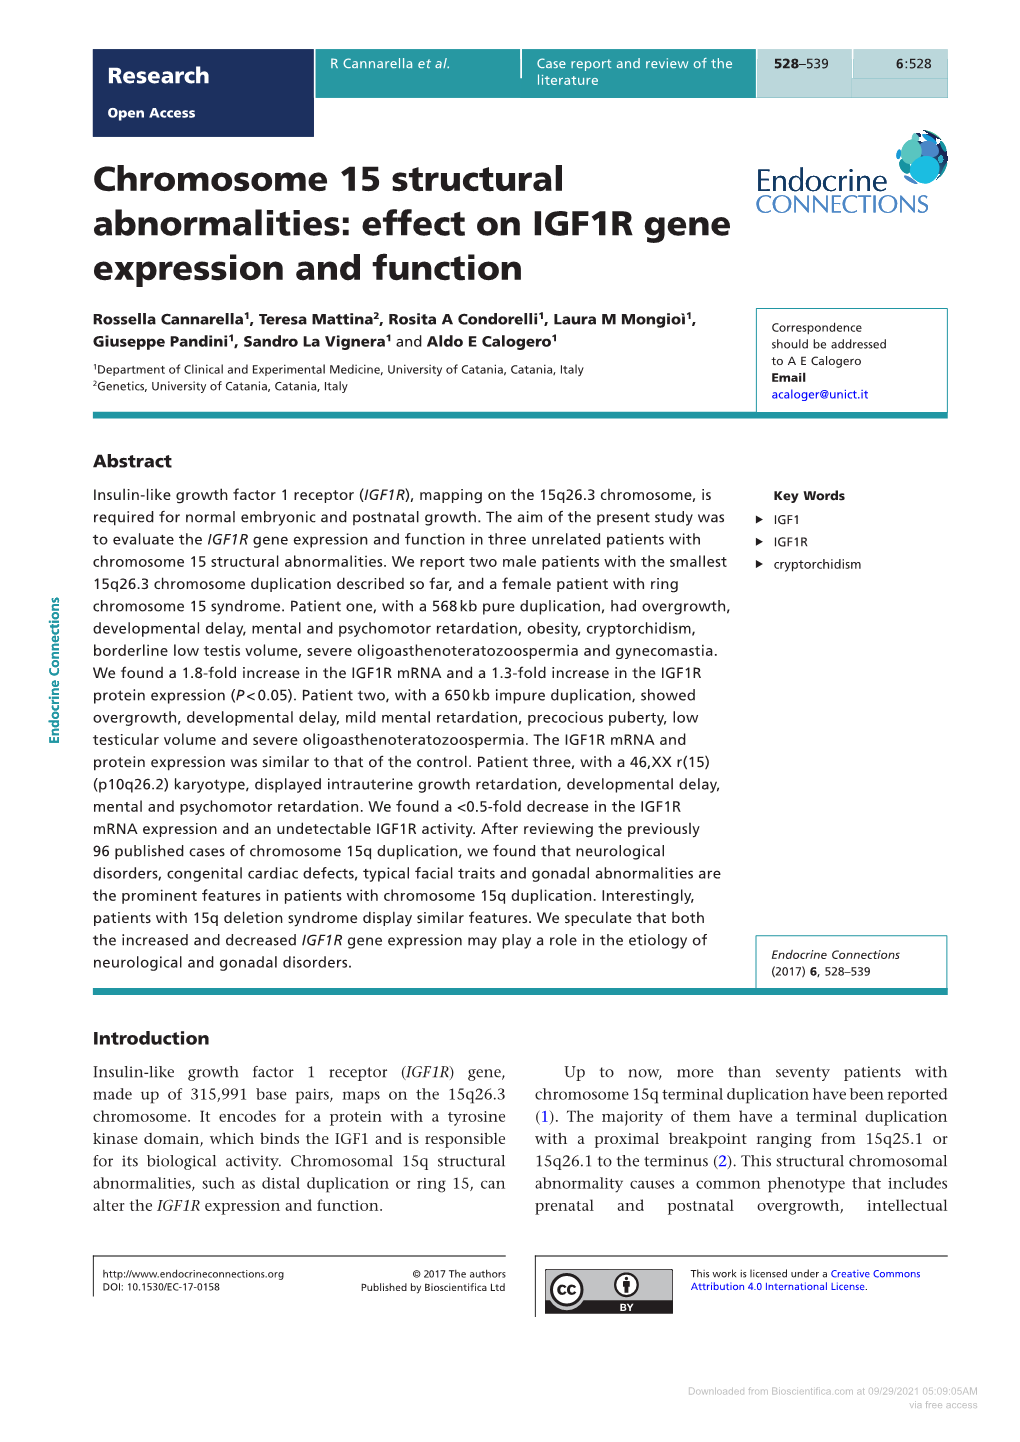 Chromosome 15 Structural Abnormalities: Effect on IGF1R Gene Expression and Function